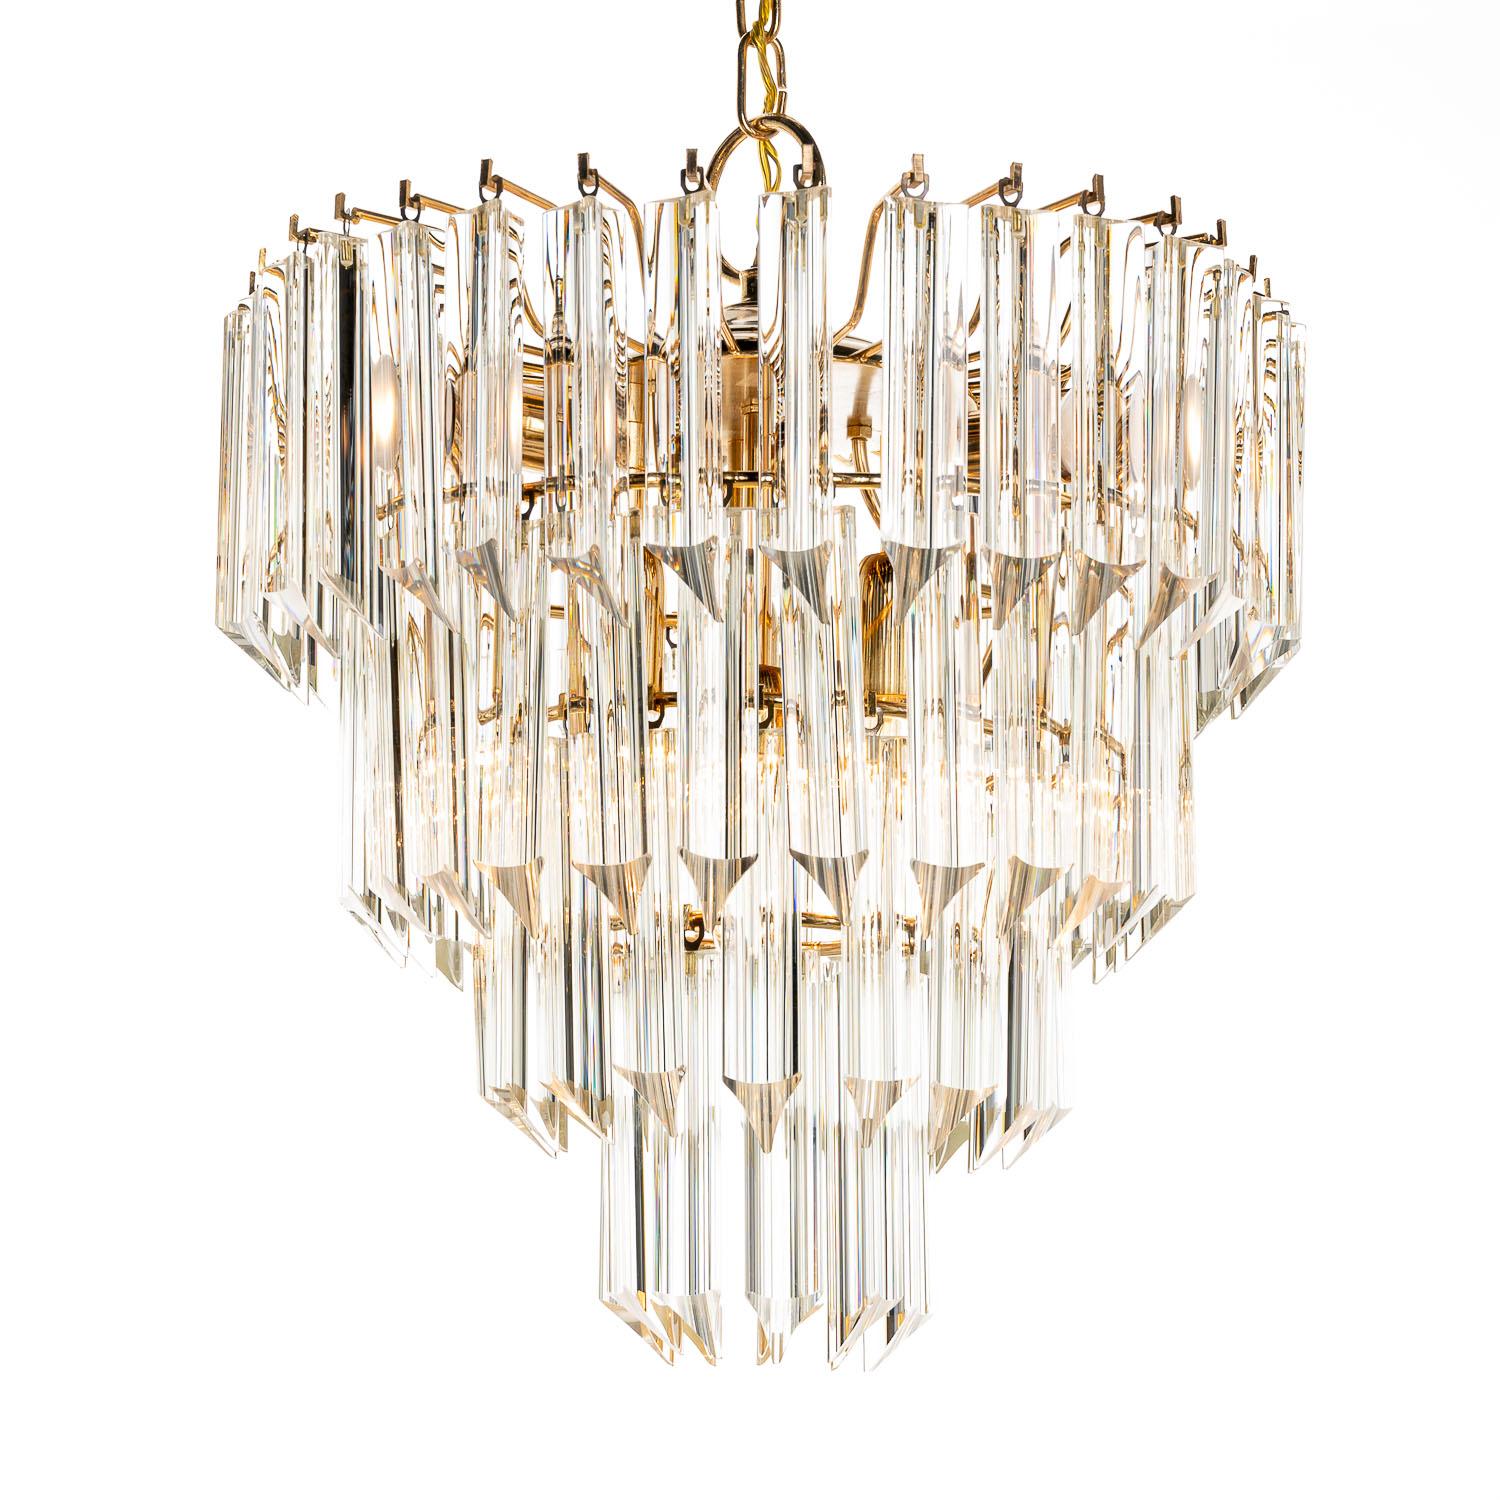 Looking for lighting that makes an impression? This is the one. From the practical, chunky chain and canopy, underneath we get to a spectacular arrangement of 82 Quadriedri Murano glass bars. This lighting is almost fantasy-like in its appearance,